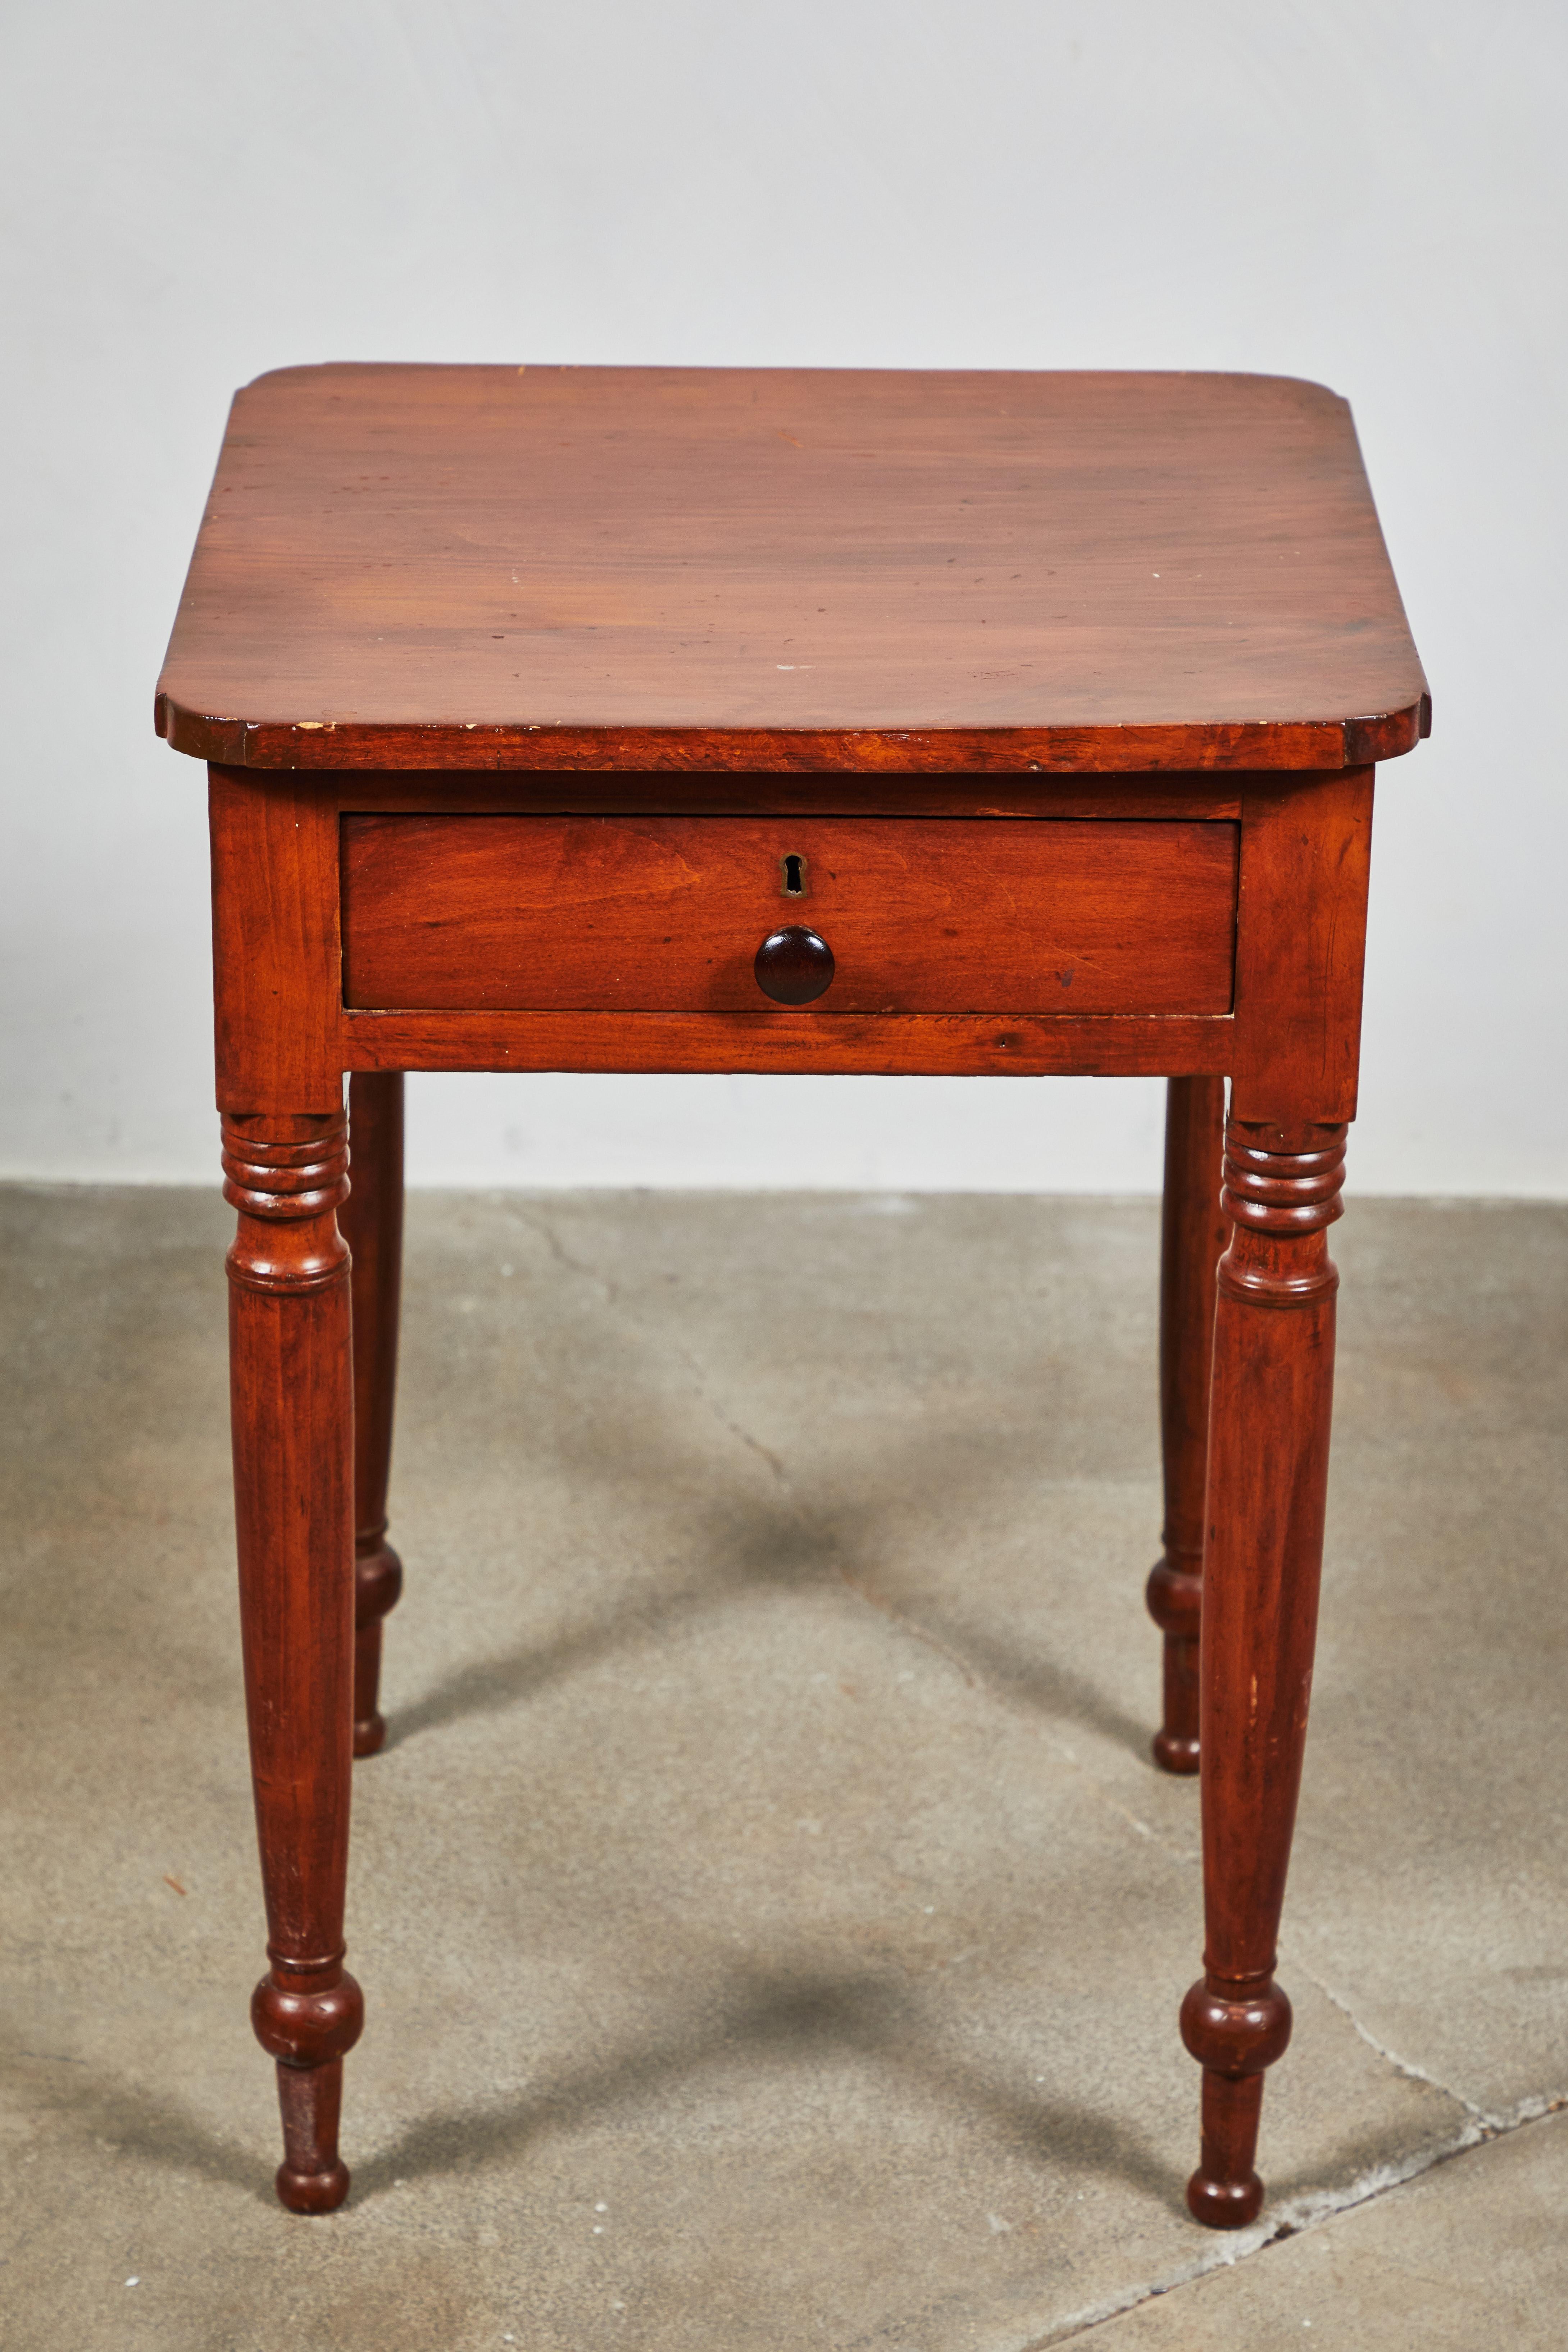 Early American side table with drawer and turned legs. Original finish cheery wood finish.